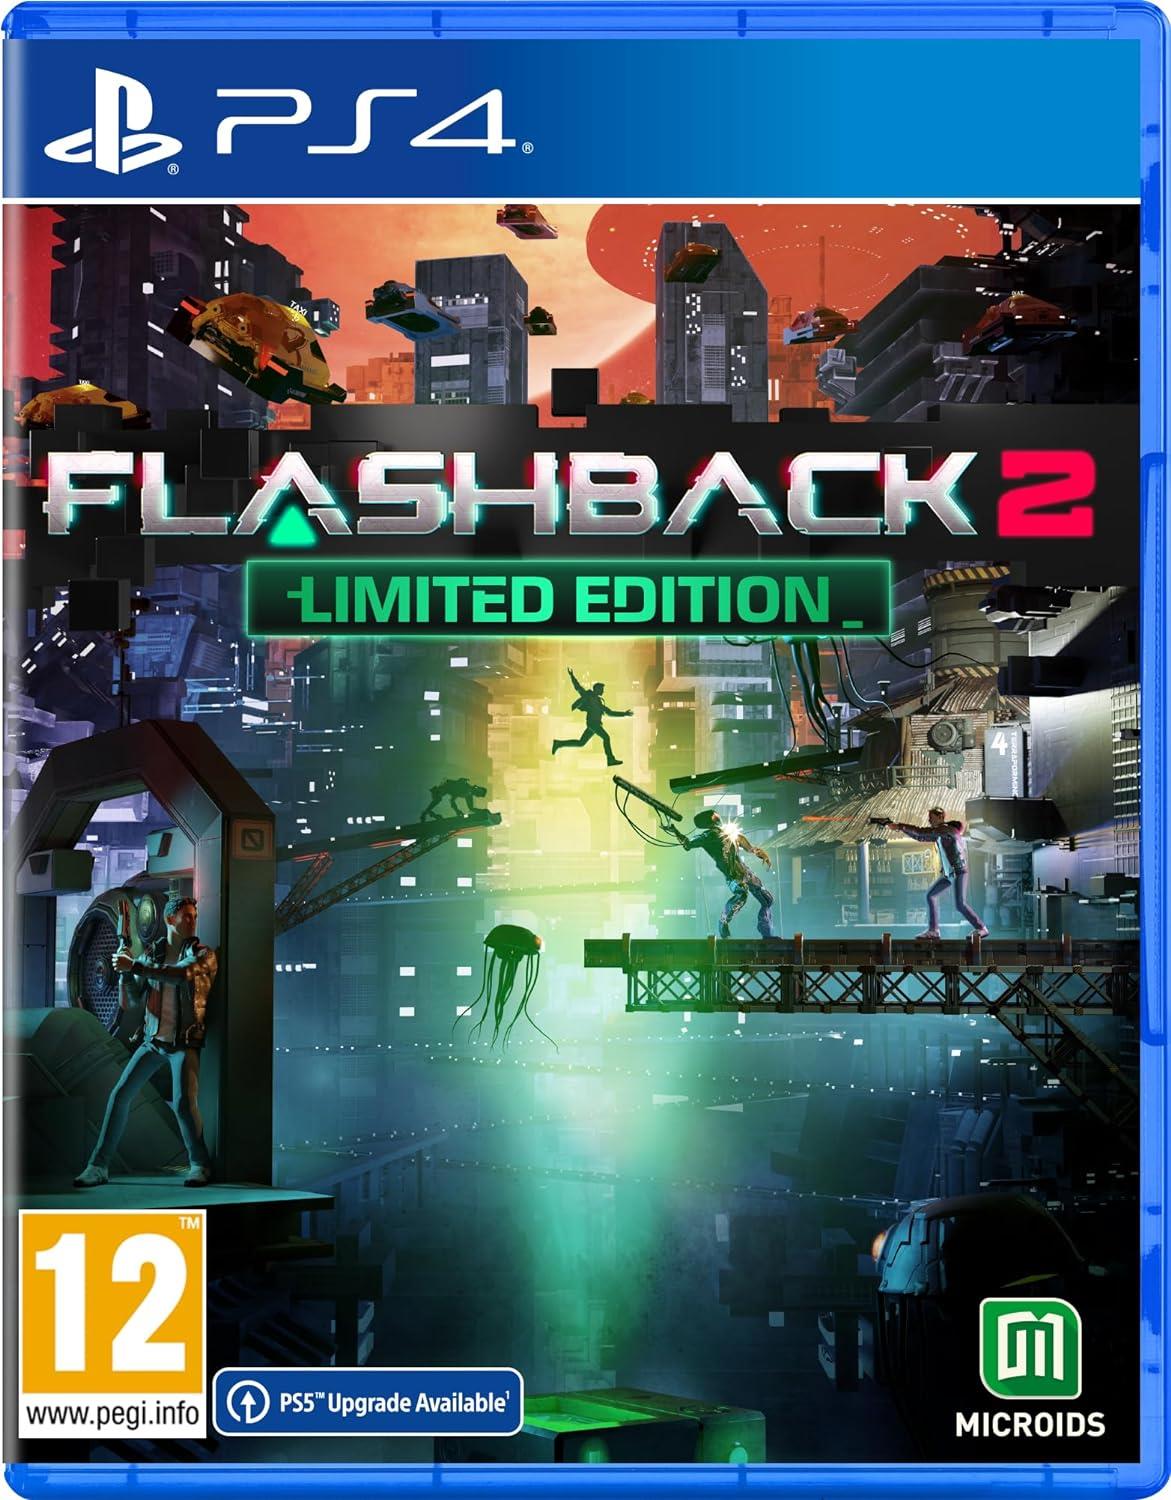 Flashback 2 PS4 Game